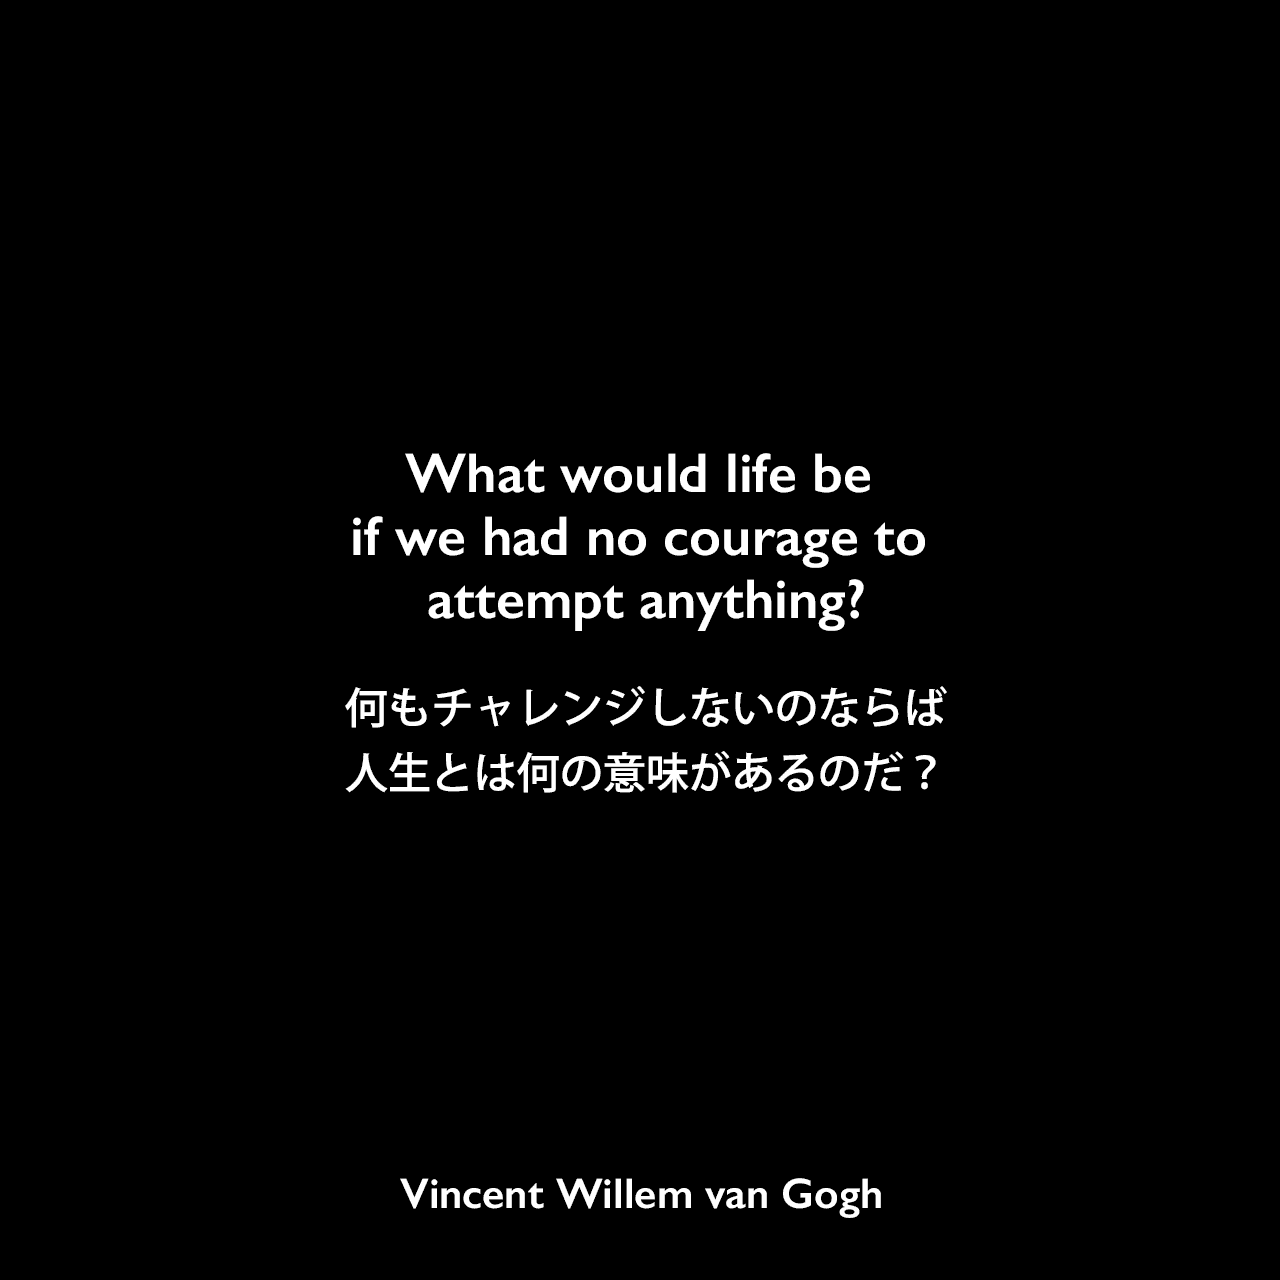 What would life be if we had no courage to attempt anything?何もチャレンジしないのならば人生とは何の意味があるのだ？